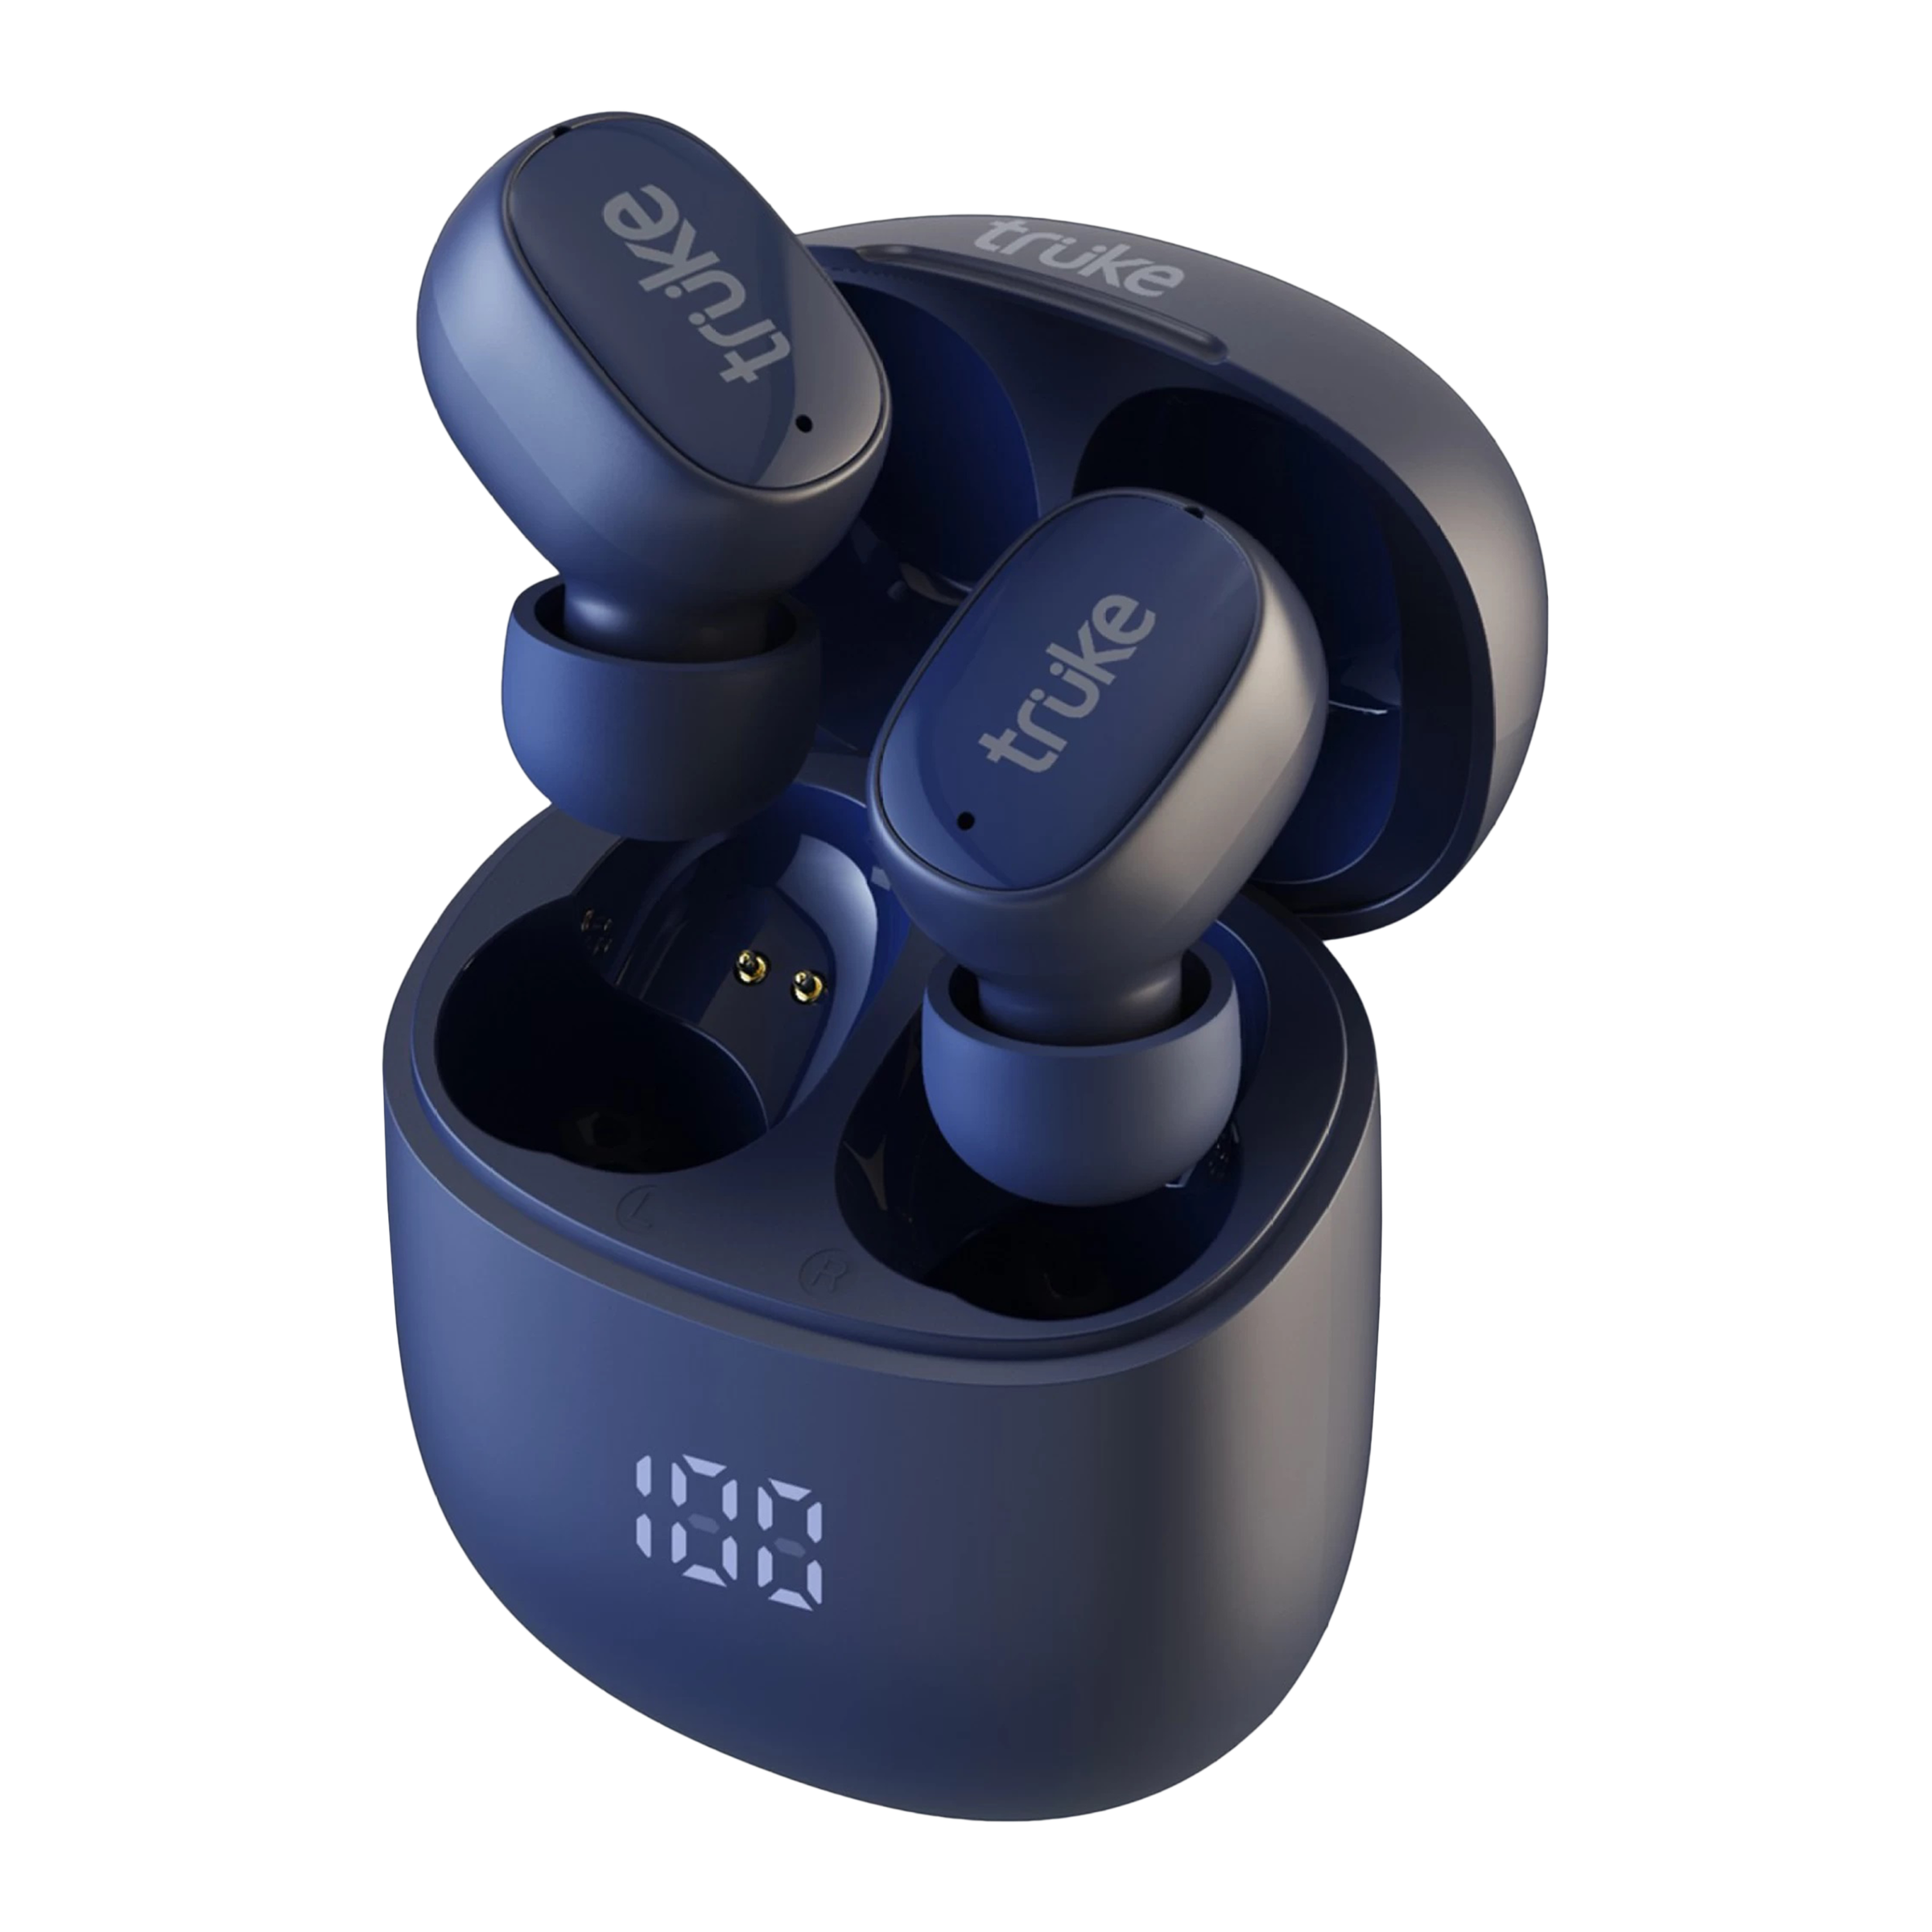 truke Buds F1 B130 TWS Earbuds with Environmental Noise Cancellation (IPX4 Sweat & Water Resistant, 48 Hours Playback, Blue)